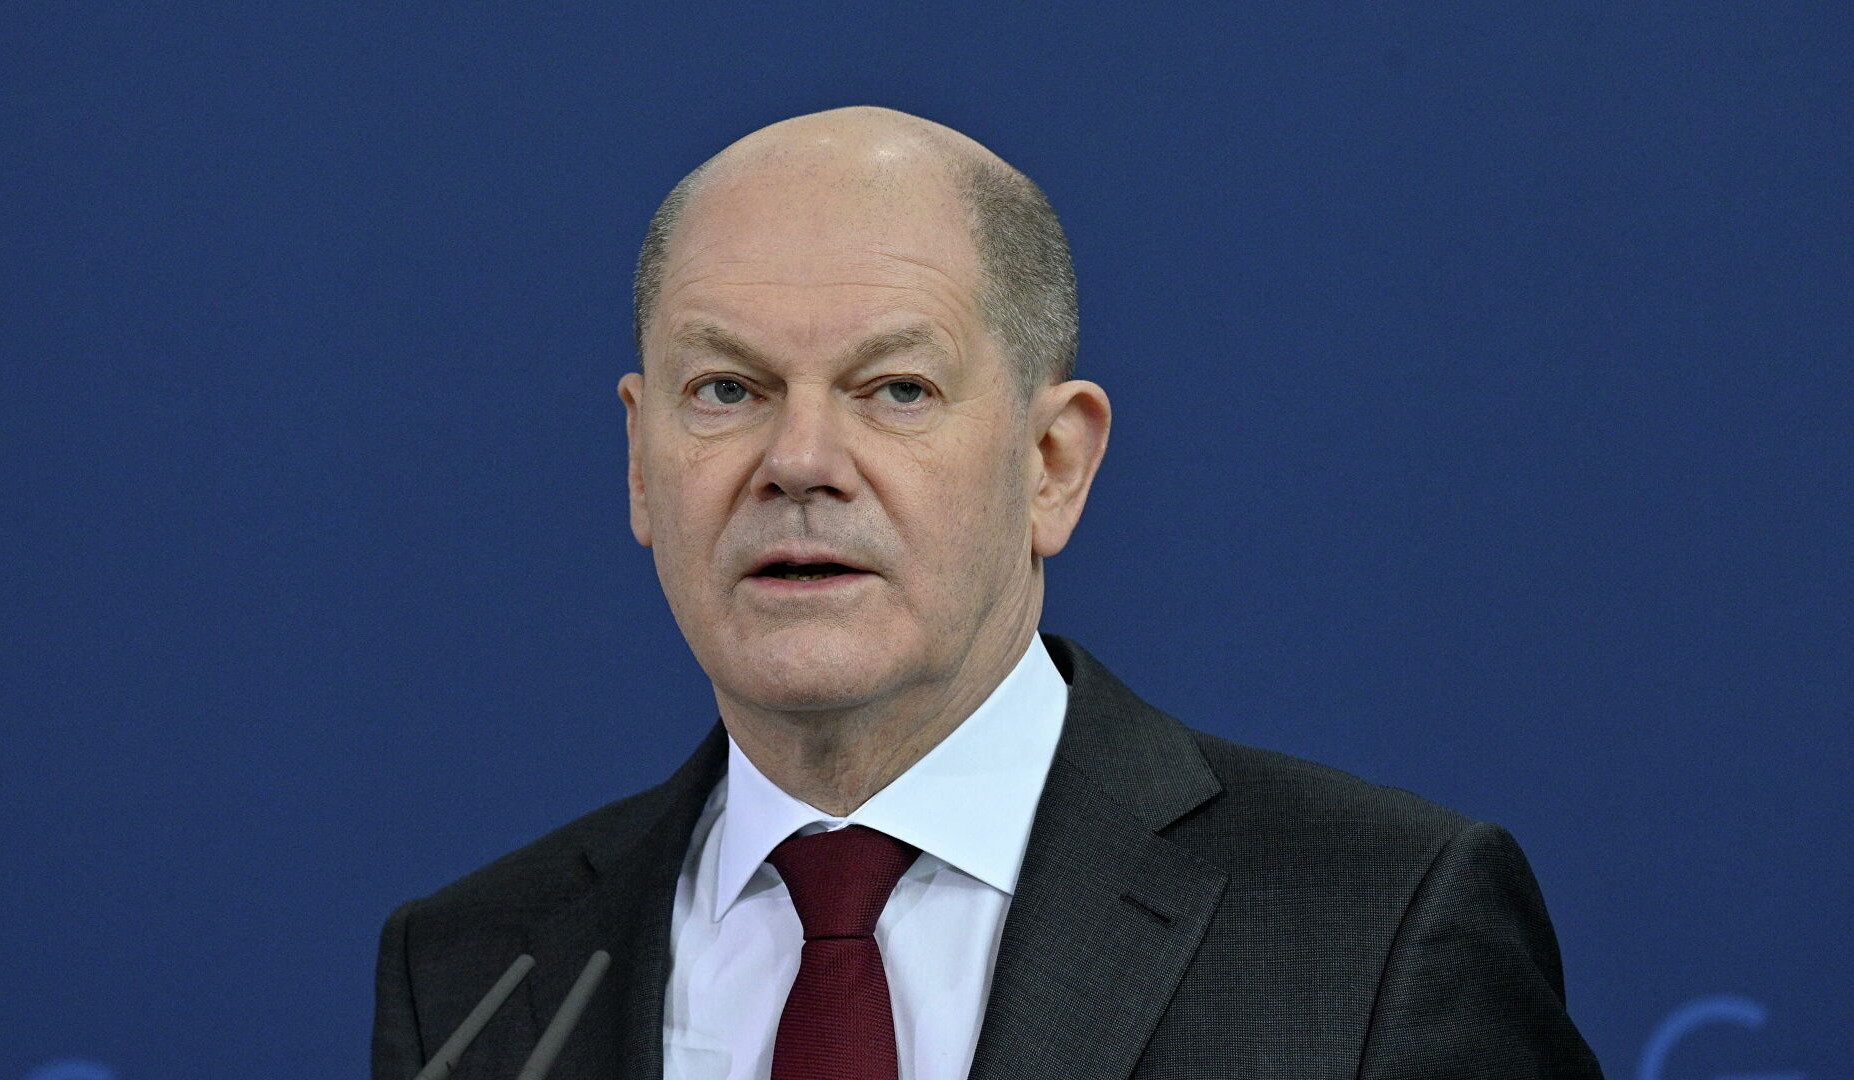 Payment currencies are fixed in contracts: Scholz on demand to pay for Russian gas in rubles